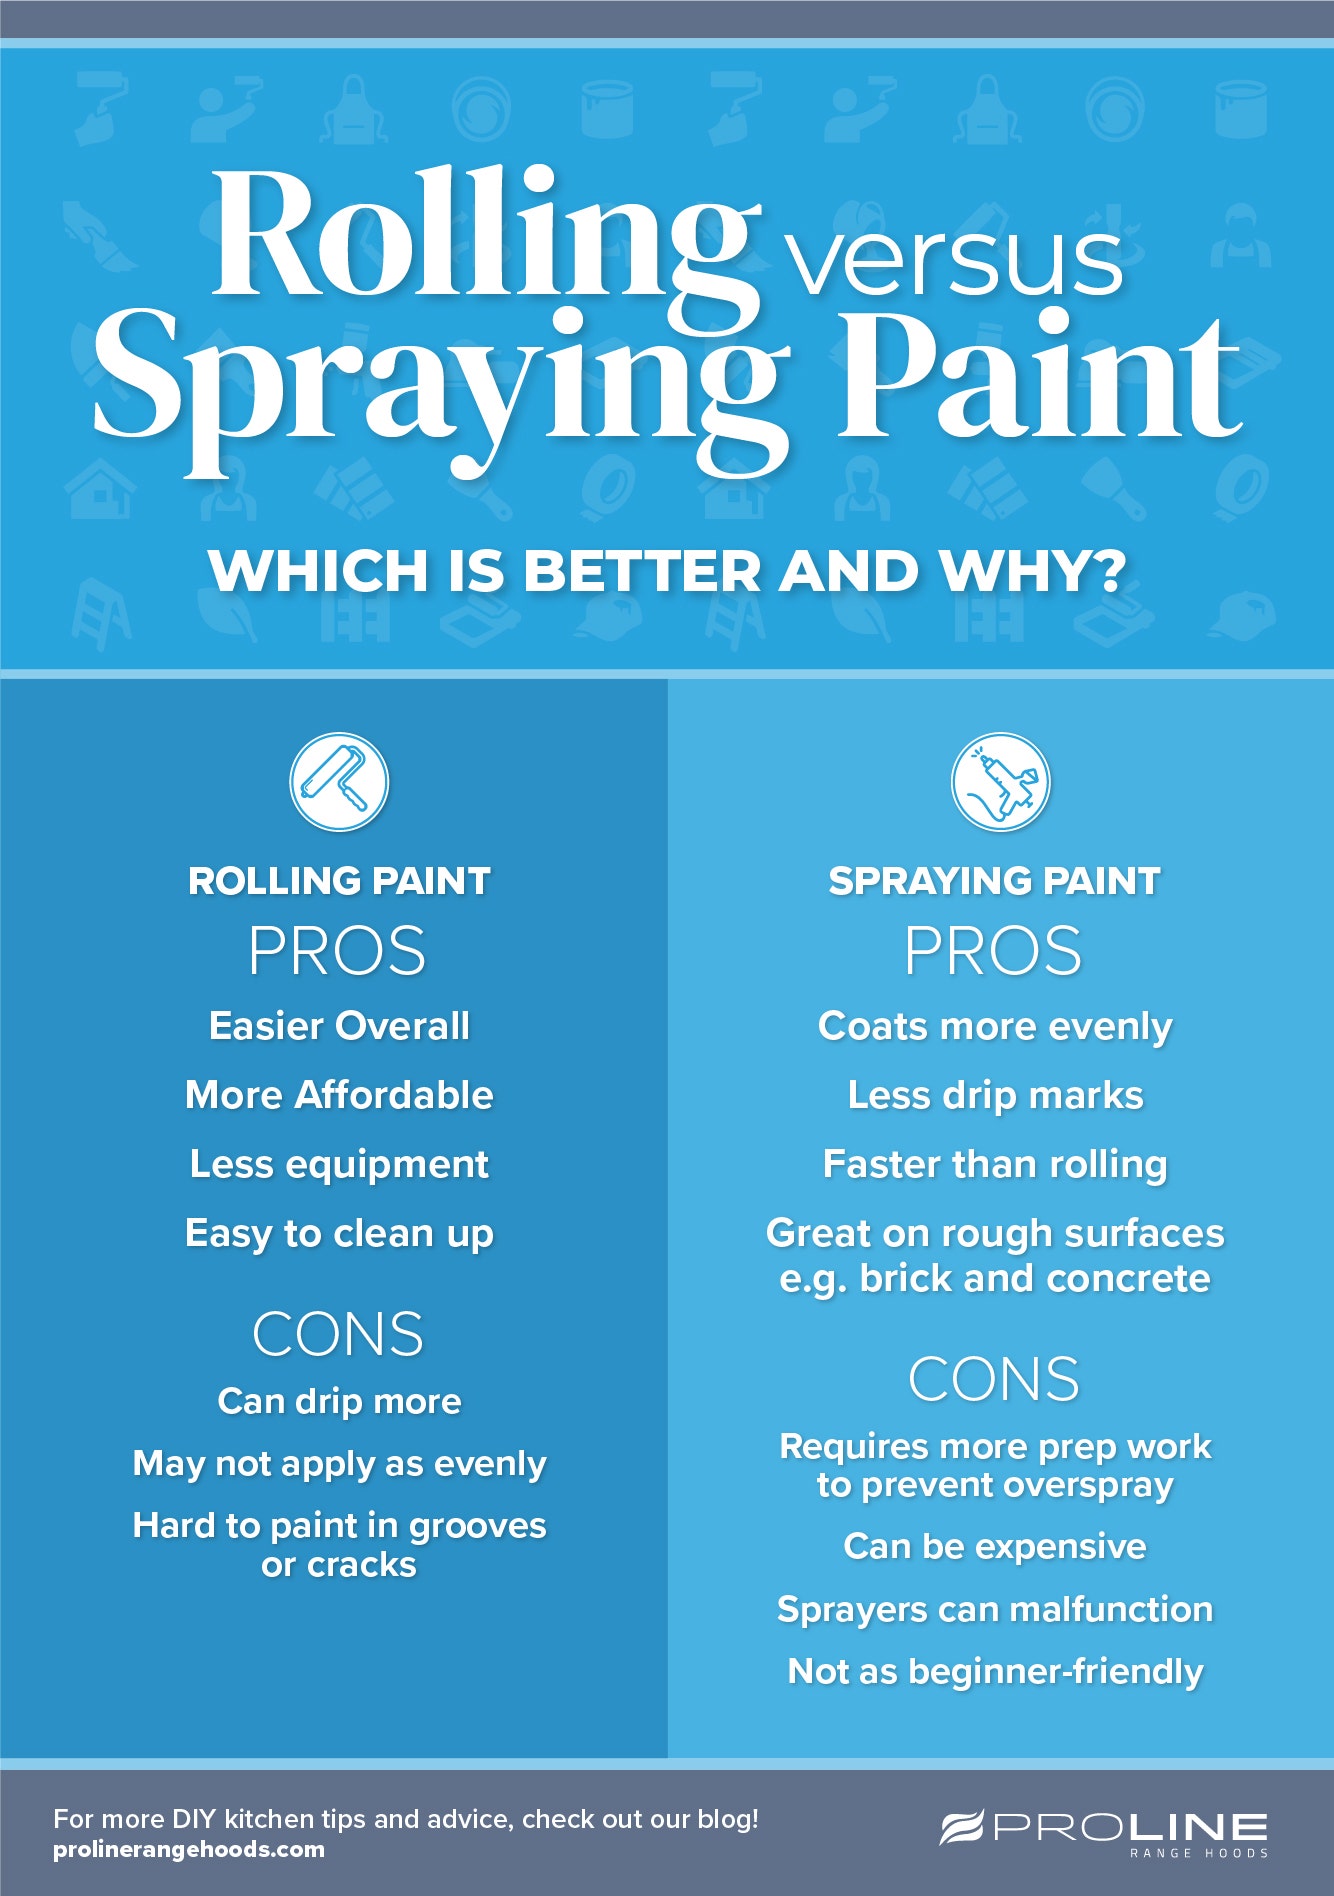 Spraying Paint vs. Rolling Paint - Which is better and why?